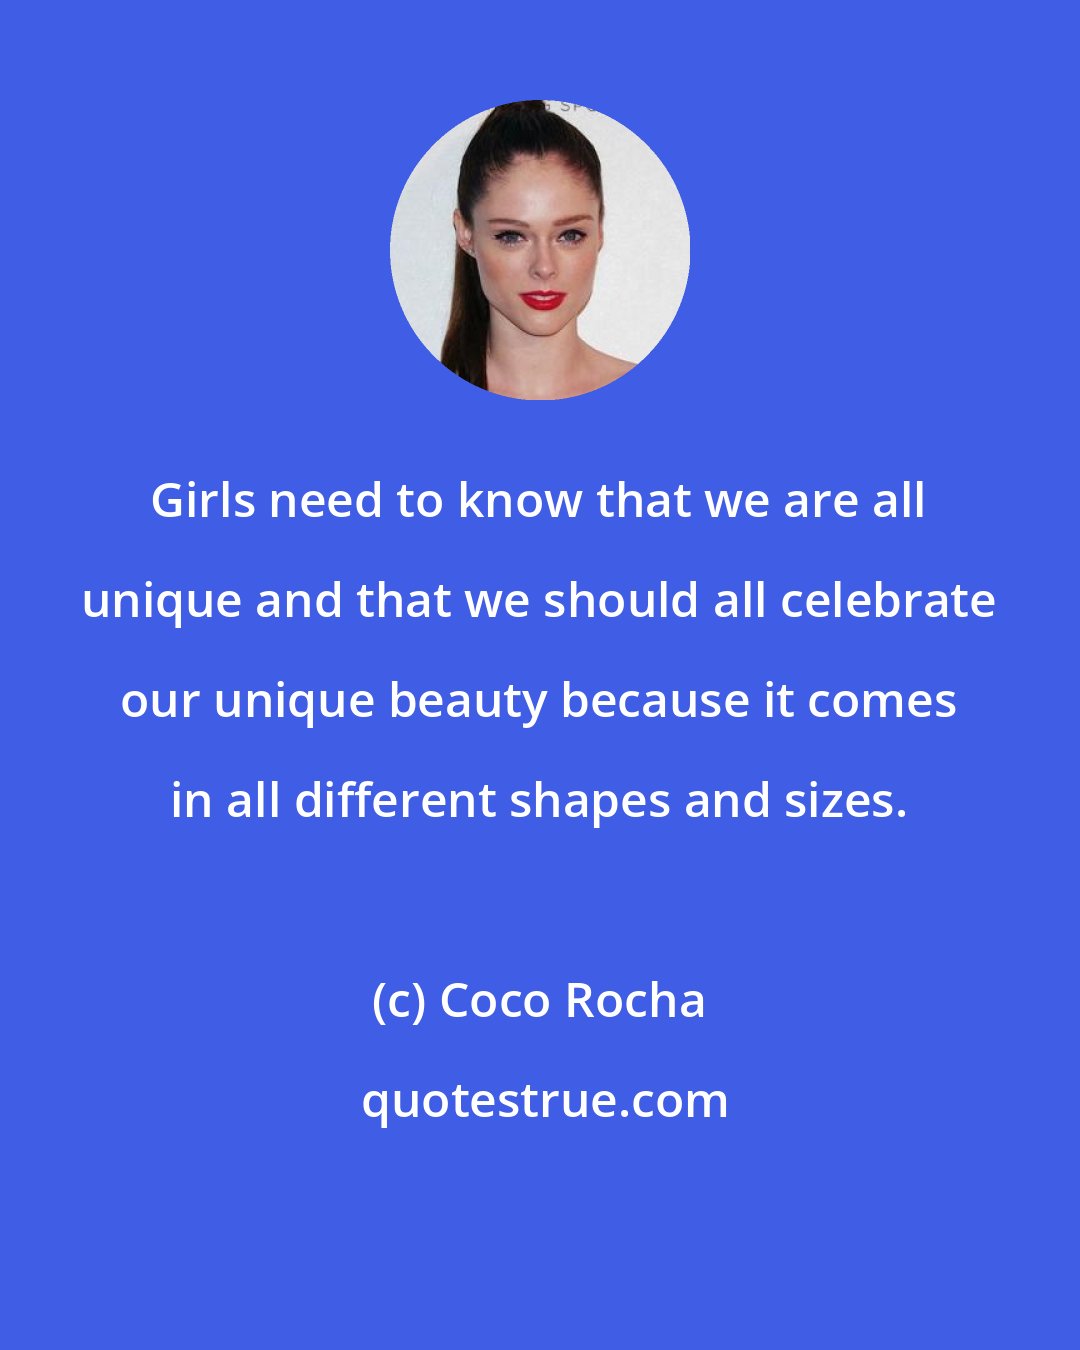 Coco Rocha: Girls need to know that we are all unique and that we should all celebrate our unique beauty because it comes in all different shapes and sizes.